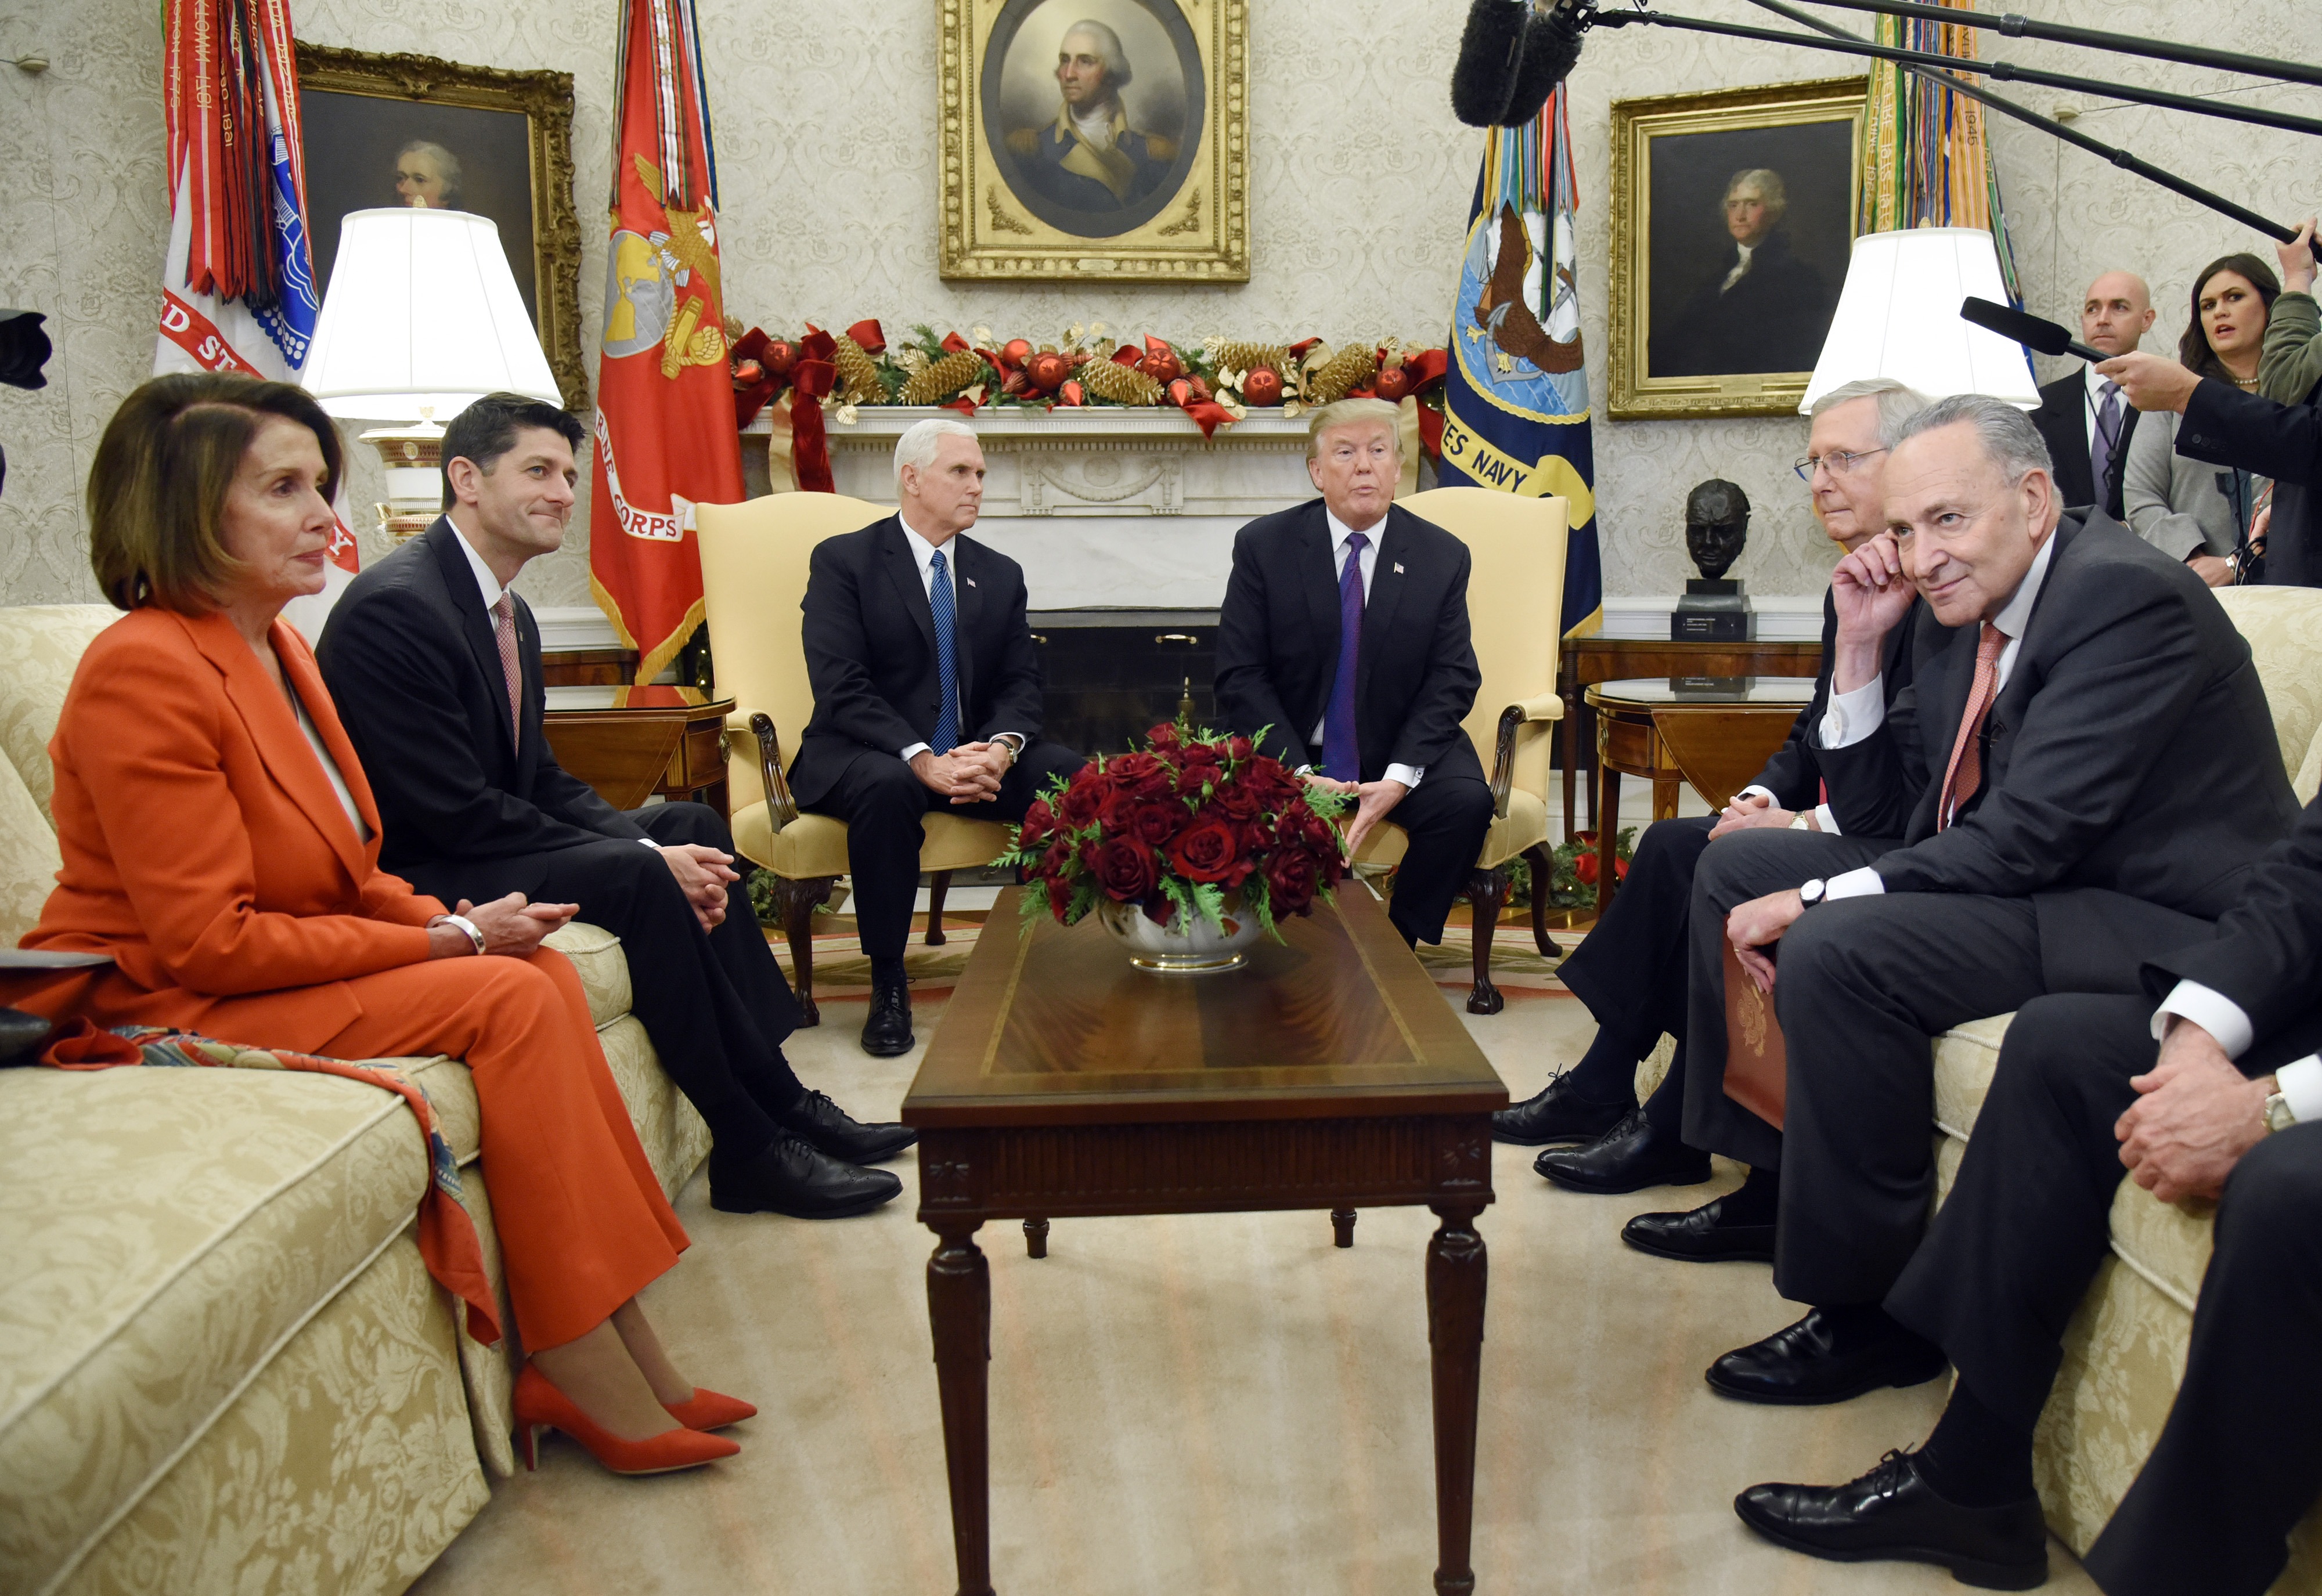 U.S. President Donald Trump and Vice President Mike Pence meet with Congressional leadership including House Minority Leader Rep. Nancy Pelosi (D-CA), House Speaker Paul Ryan, (R- WI) , Senate Majority Leader Mitch McConnell and Sen. Chuck Schumer (D-NY) in the Oval Office of the White House on December 7, 2017 in Washington, DC. (Photo by Olivier Douliery - Pool/Getty Images)